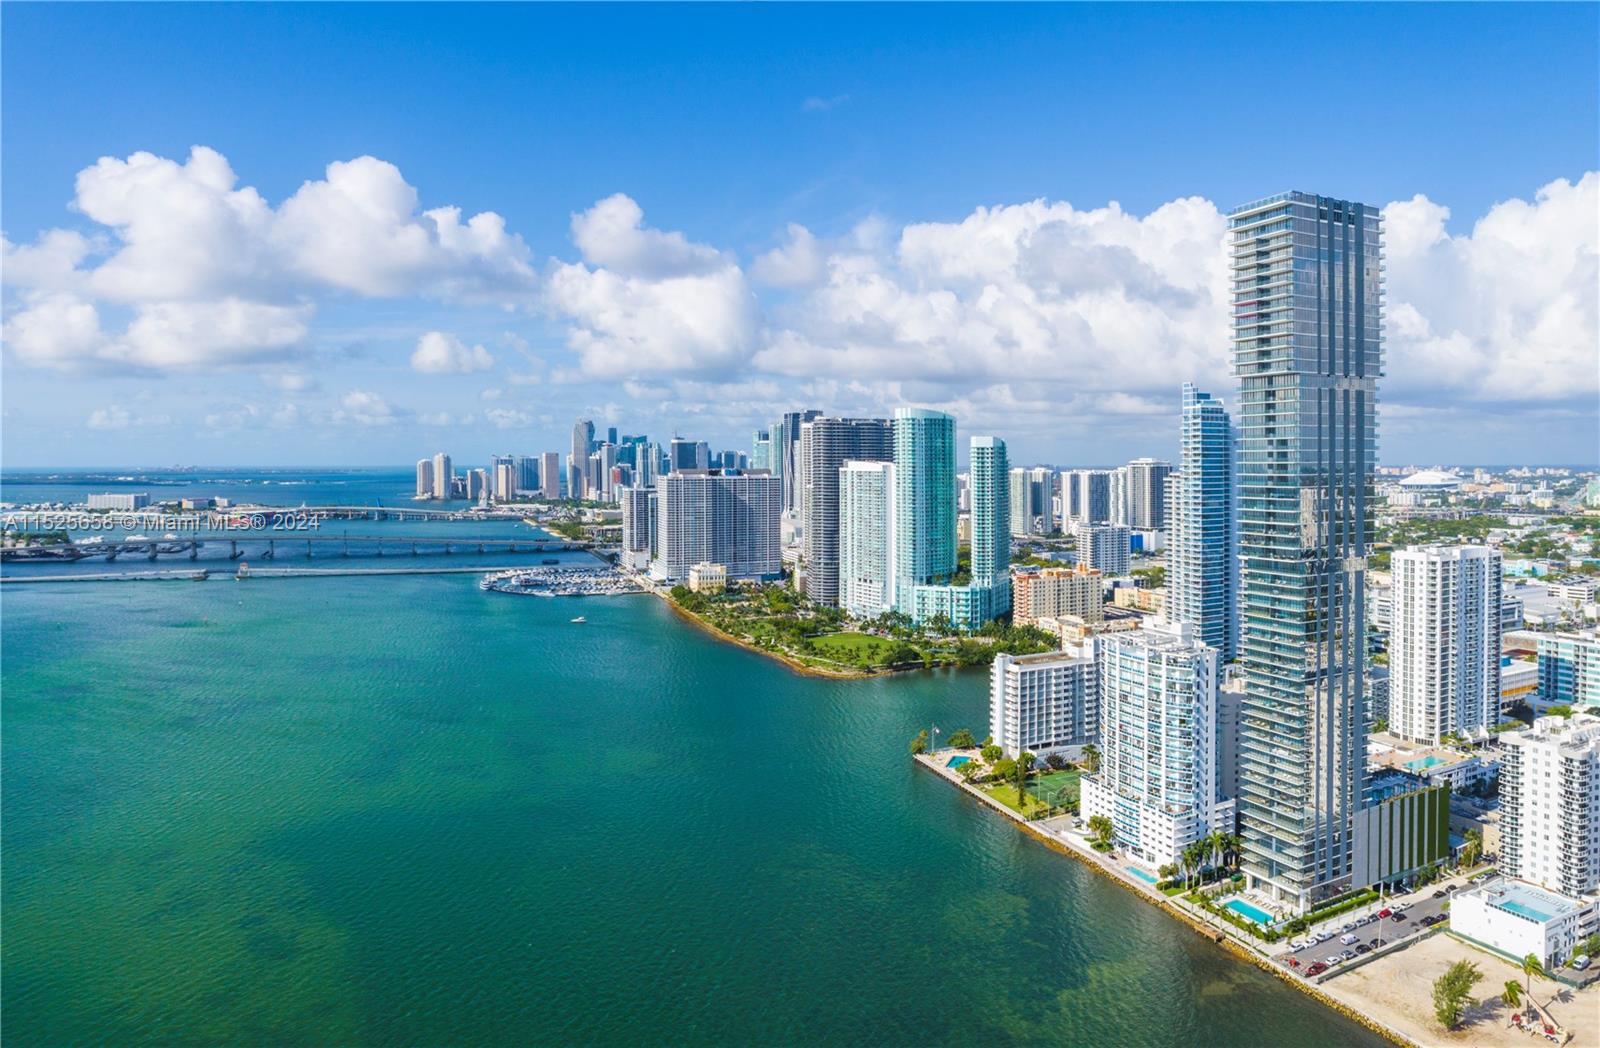 Rising alongside Biscayne Bay, Elysee is at the center of all that's new and exciting in Miami. Edgewater is surrounded by some of the country's most vibrant neighborhoods, including the Design District, Wynwood Arts District, Arts & Entertainment District, Midtown, Brickell Financial District, Downtown and Miami Beach. With only two residences per floor, Elysee is truly the only new residential offering in Edgewater designed to be large, refined estates in the sky. Architecture by world renowned Bernardo Fort-Brescia and impeccable style by Jean-Louis Denoit. If you buyer is looking for privacy, luxury and white glove building. This is their home.